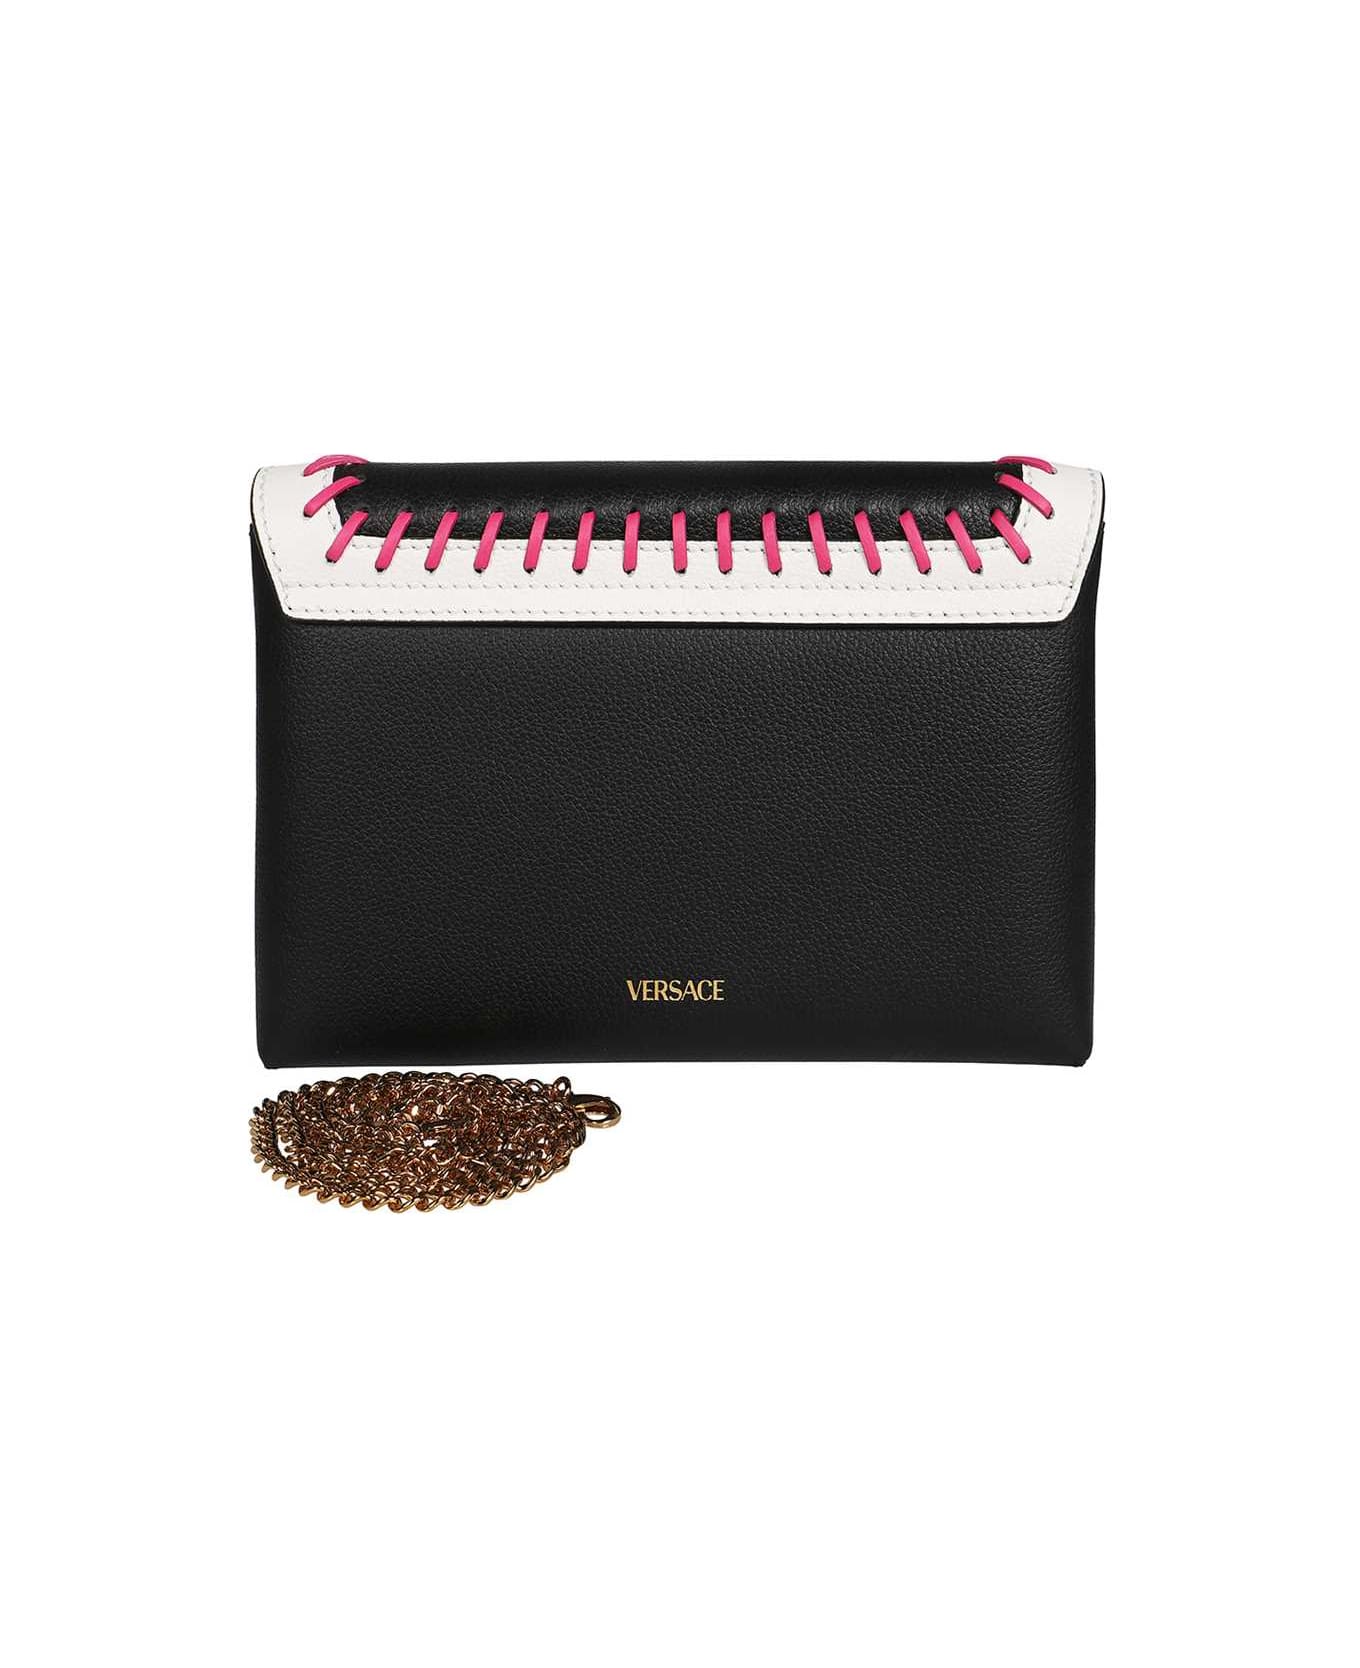 Versace Leather Clutch With Strap - black